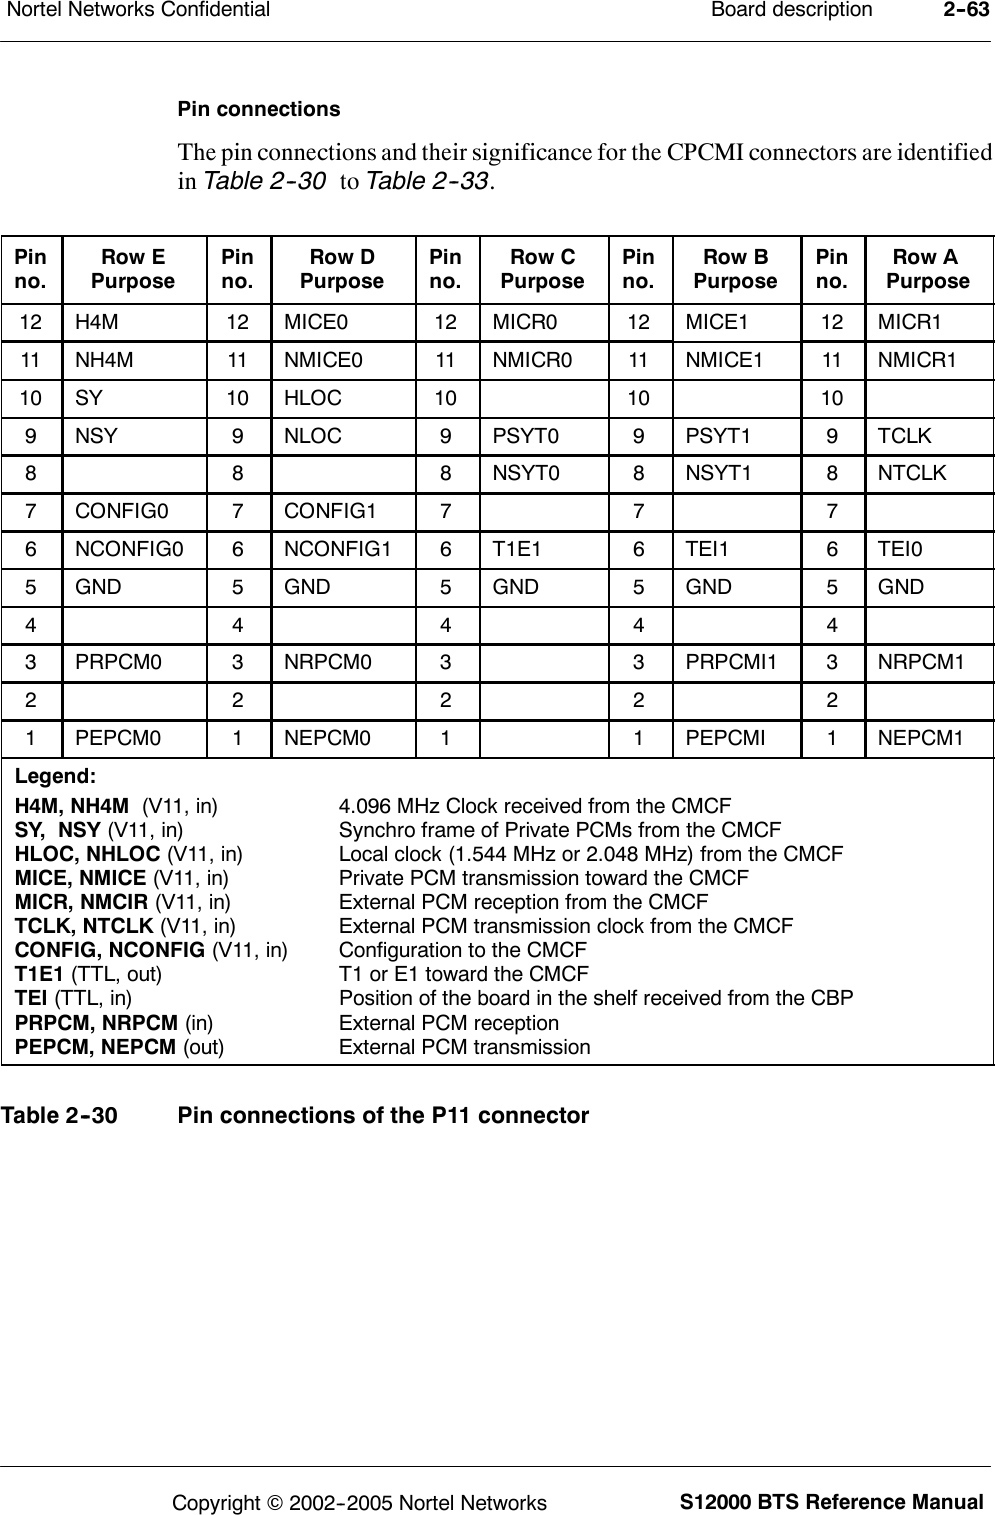 Board descriptionNortel Networks Confidential 2--63S12000 BTS Reference ManualCopyright ©2002--2005 Nortel NetworksPin connectionsThe pin connections and their significance for the CPCMI connectors are identifiedin Table 2--30 to Table 2--33.Pinno.Row EPurposePinno.Row DPurposePinno.Row CPurposePinno.Row BPurposePinno.Row APurpose12 H4M 12 MICE0 12 MICR0 12 MICE1 12 MICR111 NH4M 11 NMICE0 11 NMICR0 11 NMICE1 11 NMICR110 SY 10 HLOC 10 10 109NSY 9NLOC 9PSYT0 9PSYT1 9TCLK8 8 8 NSYT0 8NSYT1 8NTCLK7CONFIG0 7CONFIG1 7 7 76NCONFIG0 6NCONFIG1 6T1E1 6TEI1 6TEI05GND 5GND 5GND 5GND 5GND4 4 4 4 43PRPCM0 3NRPCM0 3 3 PRPCMI1 3NRPCM12 2 2 2 21PEPCM0 1NEPCM0 1 1 PEPCMI 1NEPCM1Legend:H4M, NH4M (V11, in) 4.096 MHz Clock received from the CMCFSY, NSY (V11, in) Synchro frame of Private PCMs from the CMCFHLOC, NHLOC (V11, in) Local clock (1.544 MHz or 2.048 MHz) from the CMCFMICE, NMICE (V11, in) Private PCM transmission toward the CMCFMICR, NMCIR (V11, in) External PCM reception from the CMCFTCLK, NTCLK (V11, in) External PCM transmission clock from the CMCFCONFIG, NCONFIG (V11, in) Configuration to the CMCFT1E1 (TTL, out) T1 or E1 toward the CMCFTEI (TTL, in) Position of the board in the shelf received from the CBPPRPCM, NRPCM (in) External PCM receptionPEPCM, NEPCM (out) External PCM transmissionTable 2--30 Pin connections of the P11 connector